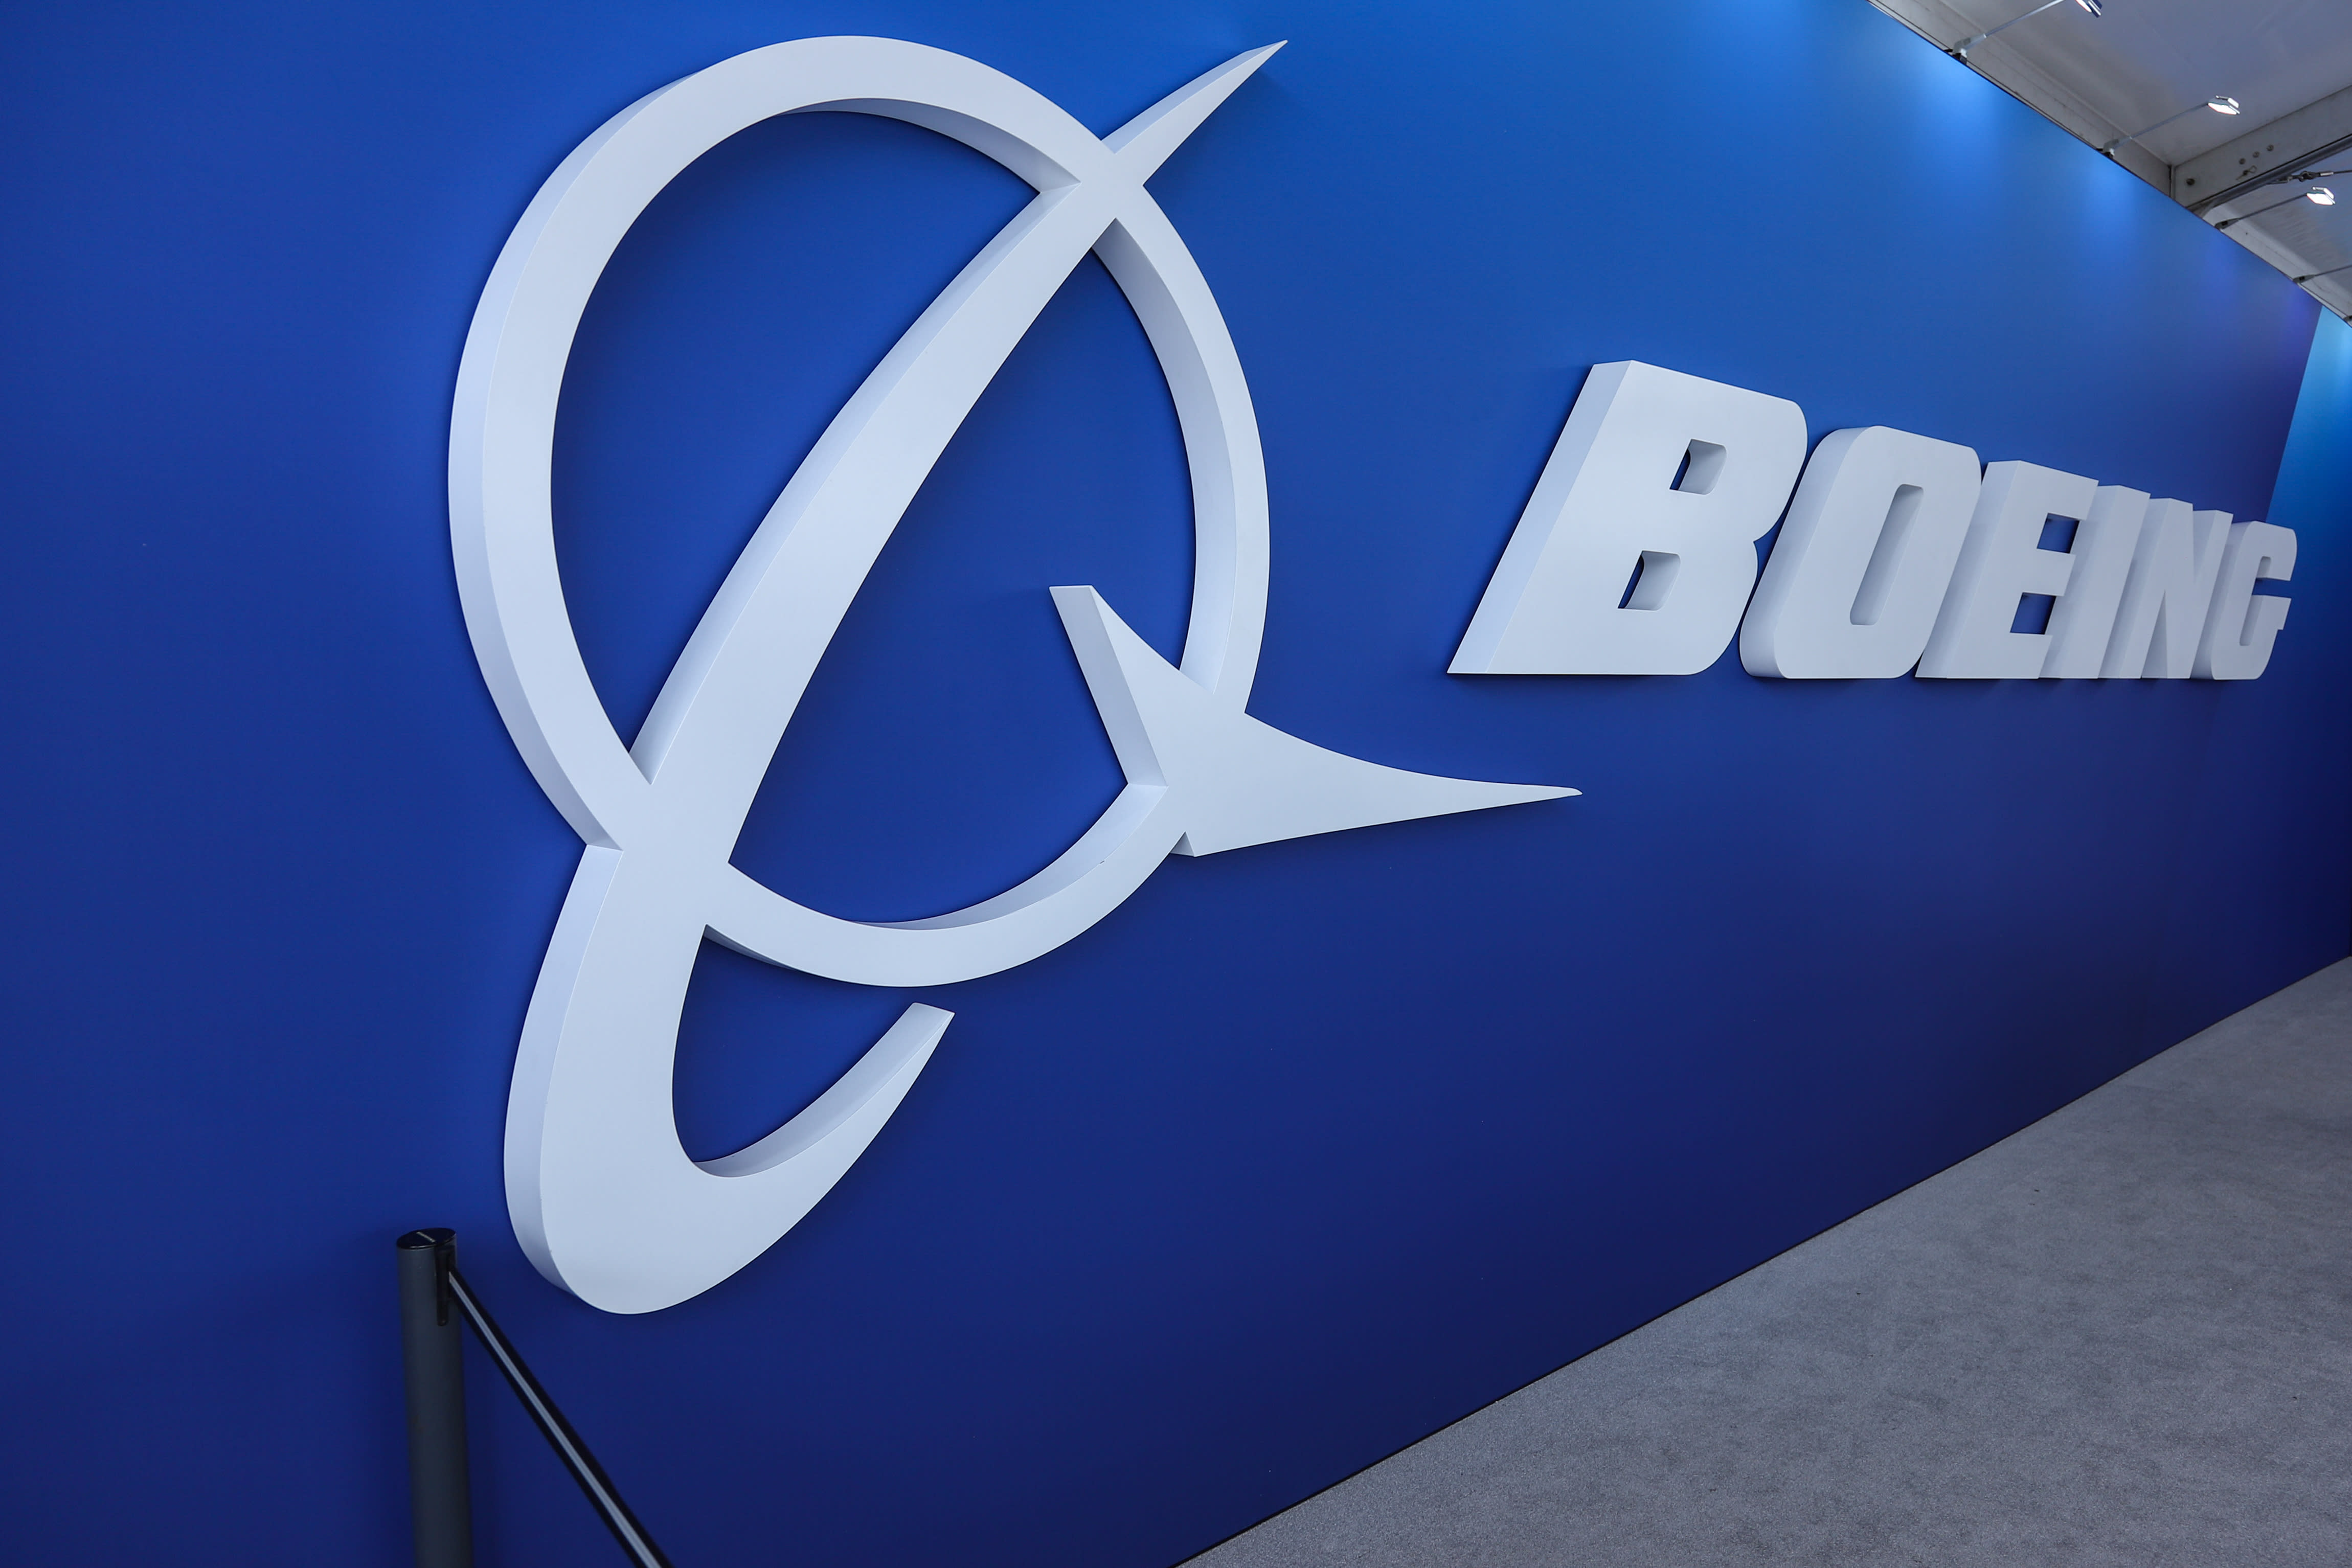 Jim Cramer sees upside potential in Boeing after the stock price was hit by the 737 Max issue